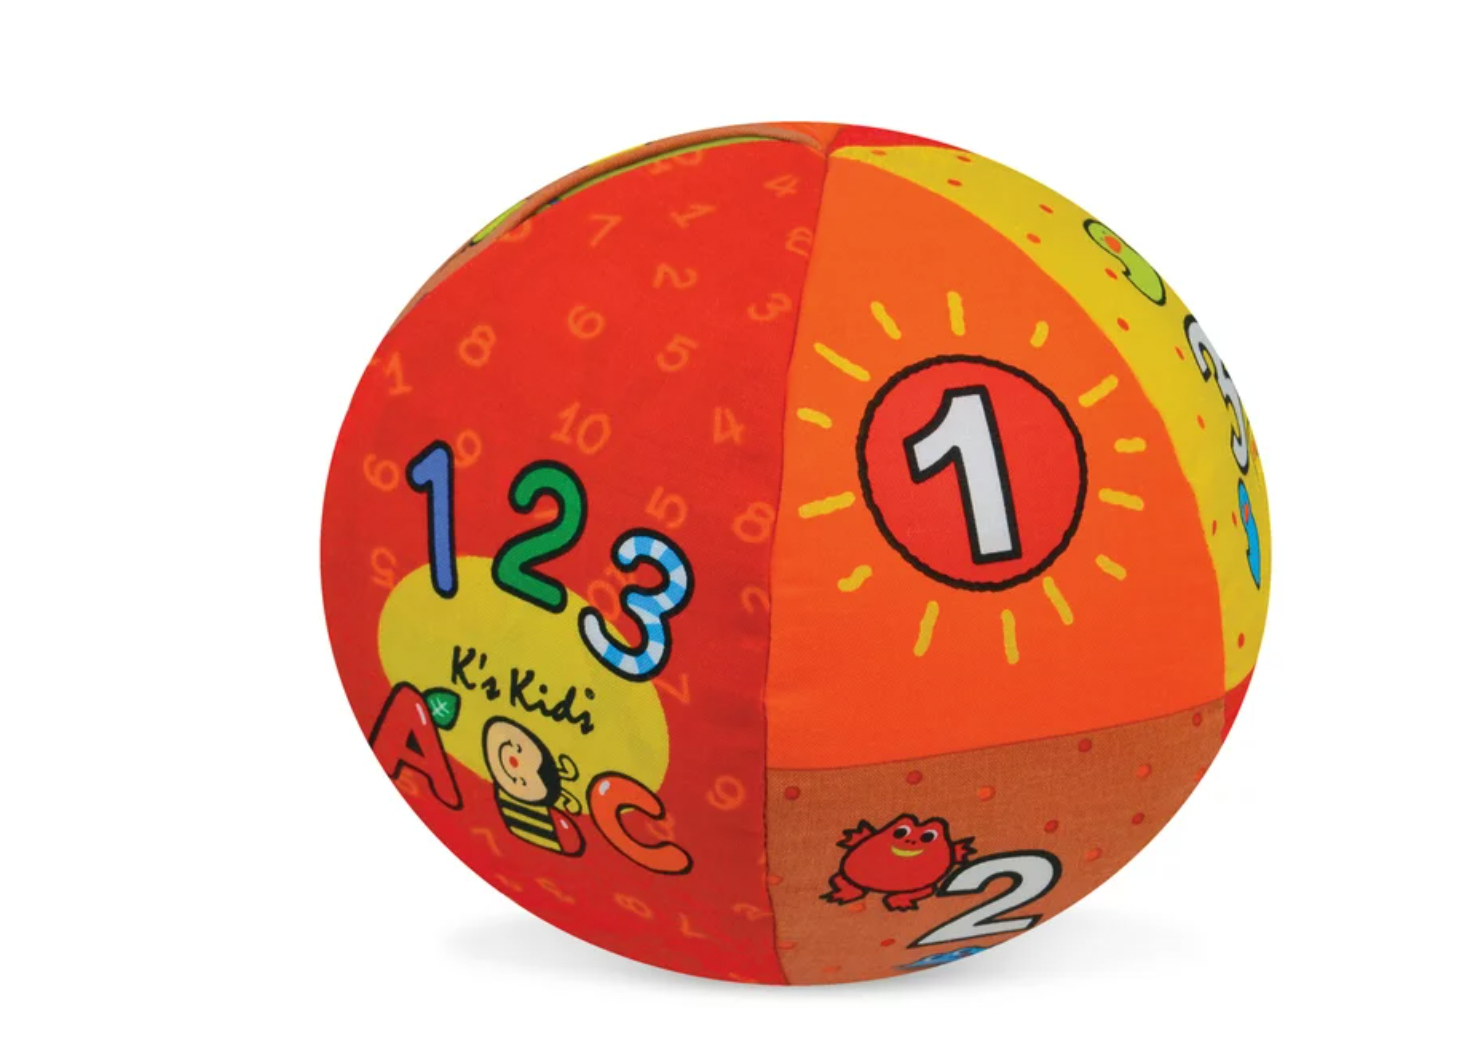 Melissa & Doug - K's Kids 2-in-1 Talking Ball Educational Toy - ABCs and Counting 1-10